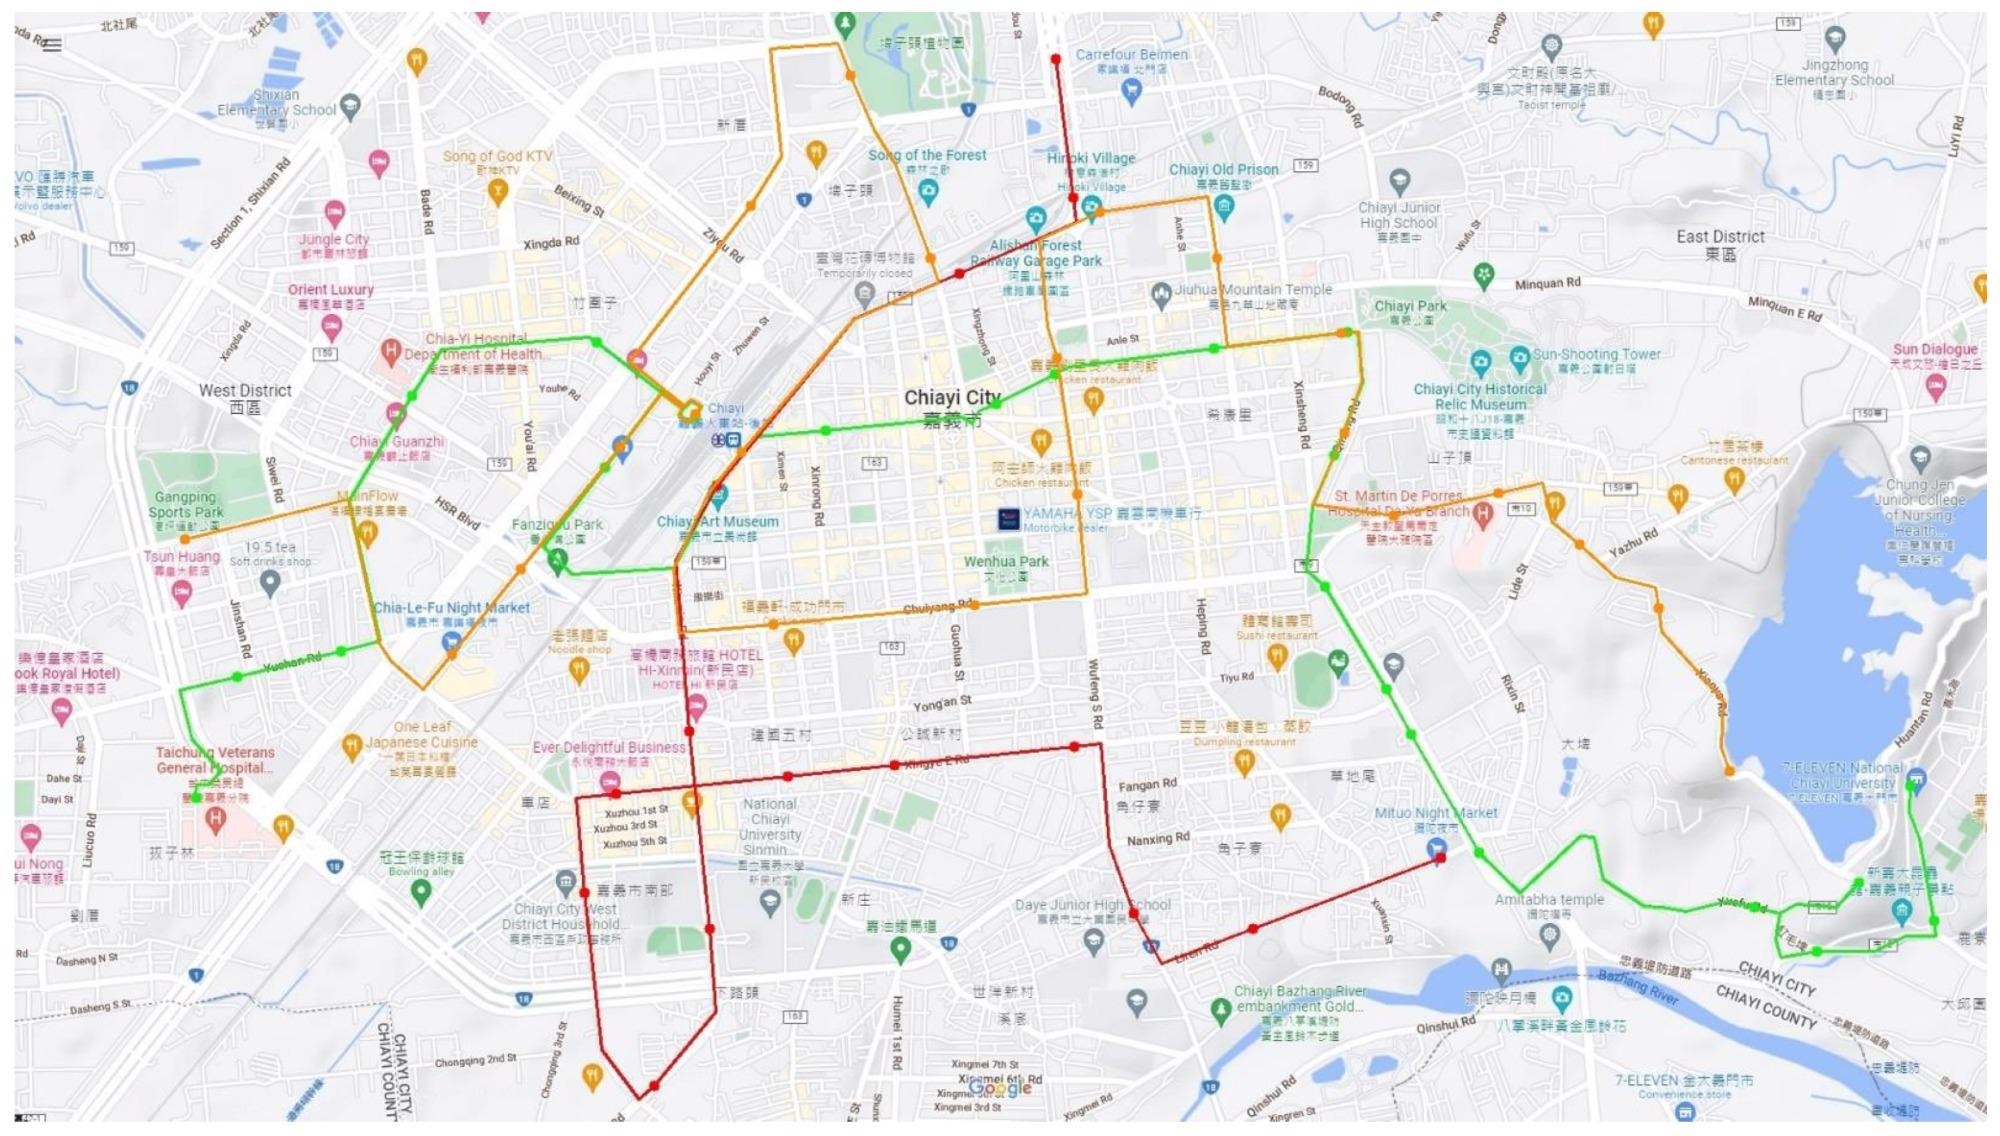 Bus routes in Chiayi city.